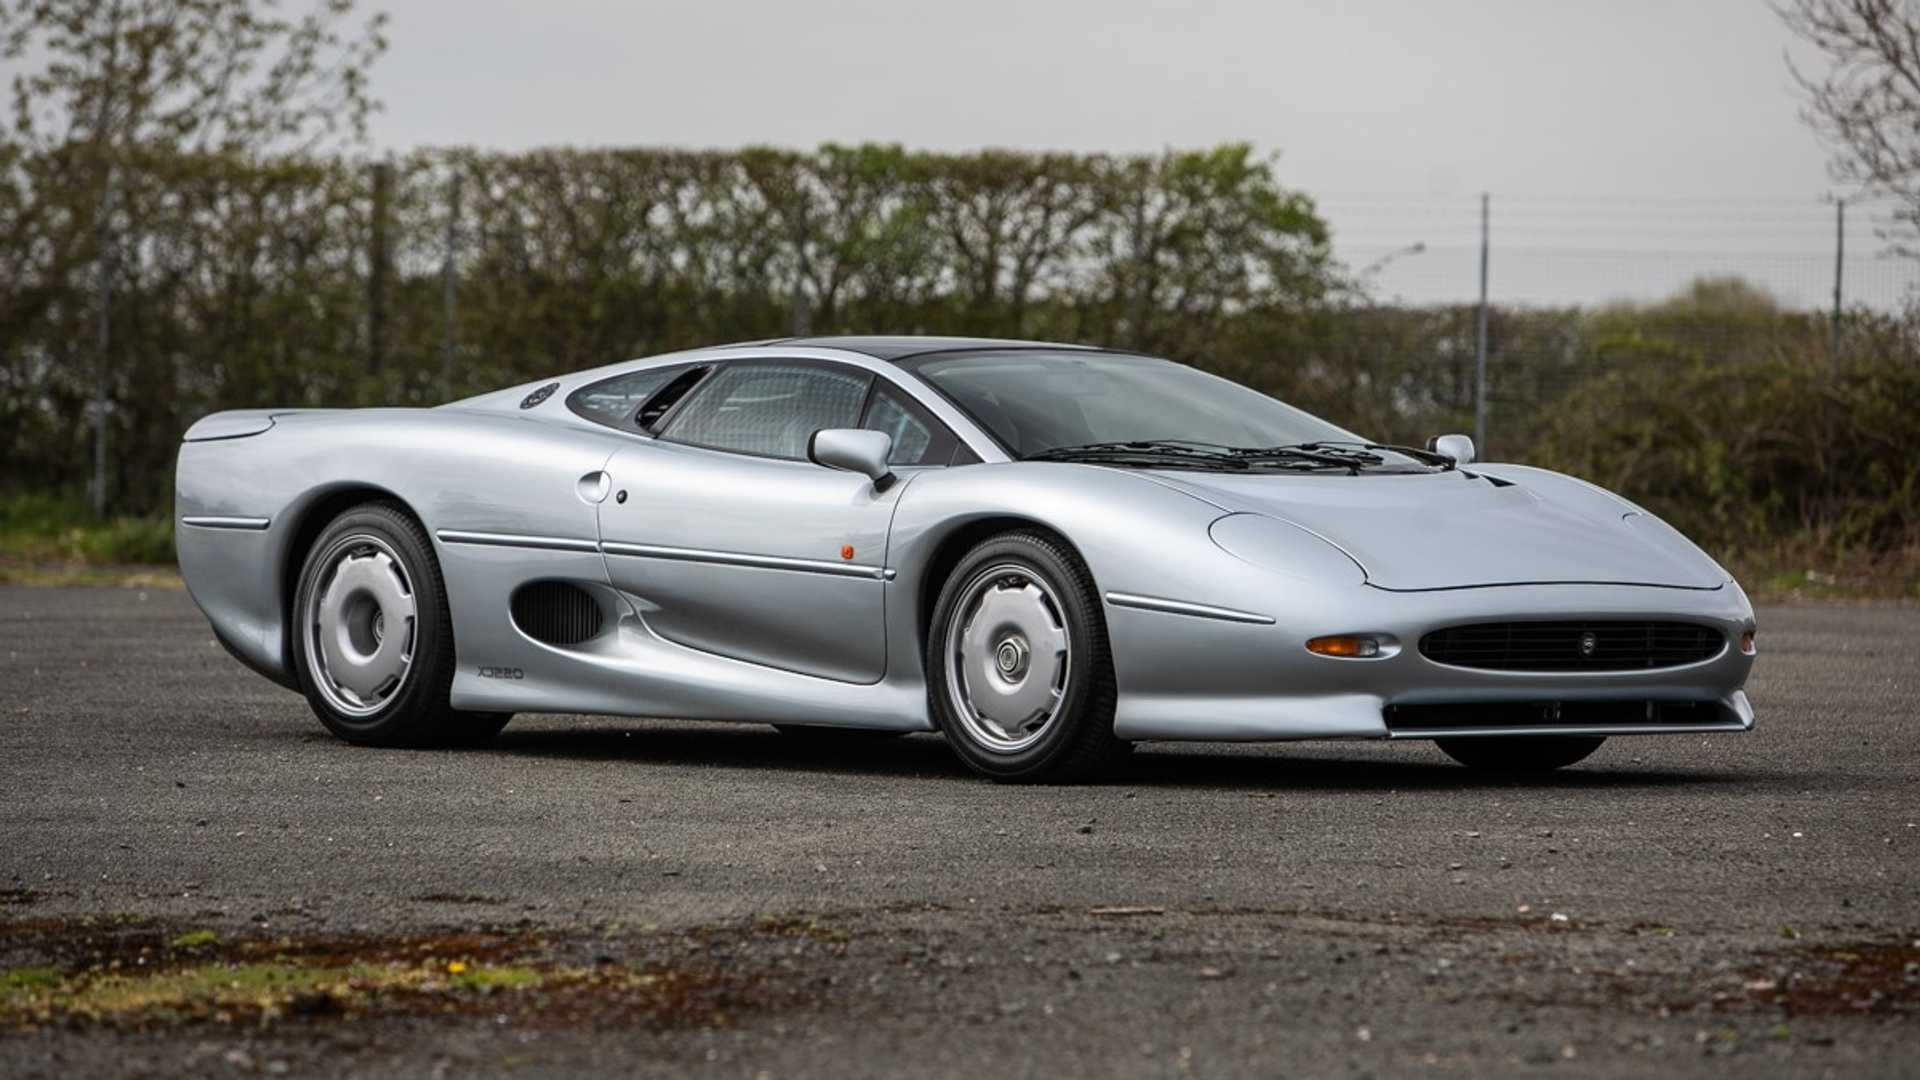 Not one, but two Jaguar XJ220 supercars up for grabs